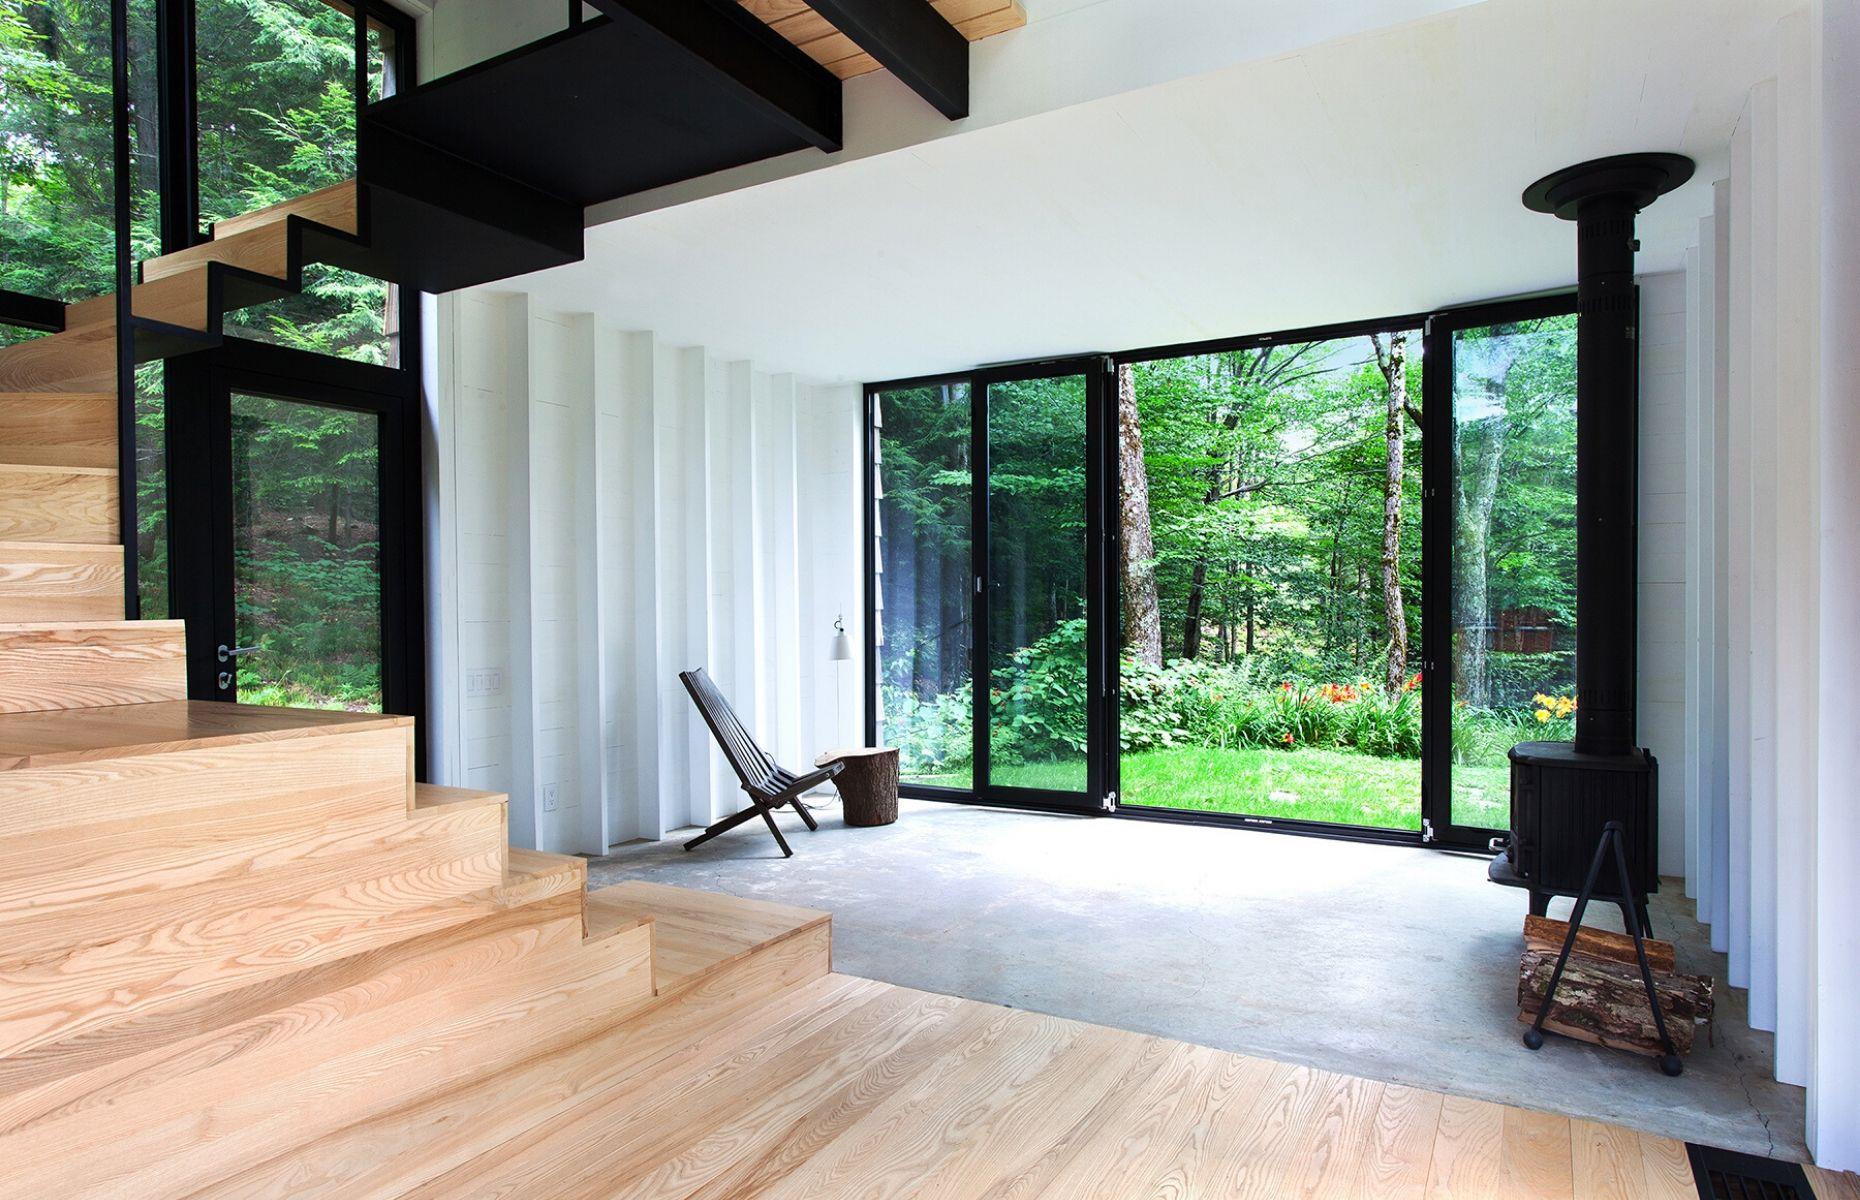 <p>In order to protect the surrounding landscape, the woodland was left entirely untouched during the build, allowing the trees to grow naturally around the property <span>–</span> resulting in ultimate seclusion! Once laid out over a single floor, the retreat now expands across three levels and spans 1,300 square feet. Light, bright and beautiful, the contemporary <a href="https://www.loveproperty.com/galleries/74547/the-cutest-chocolate-box-cottages-for-sale?page=1">cottage</a> is also ultra-chic, with floor-to-ceiling doors allowing the interior and exterior to softly merge together.</p>